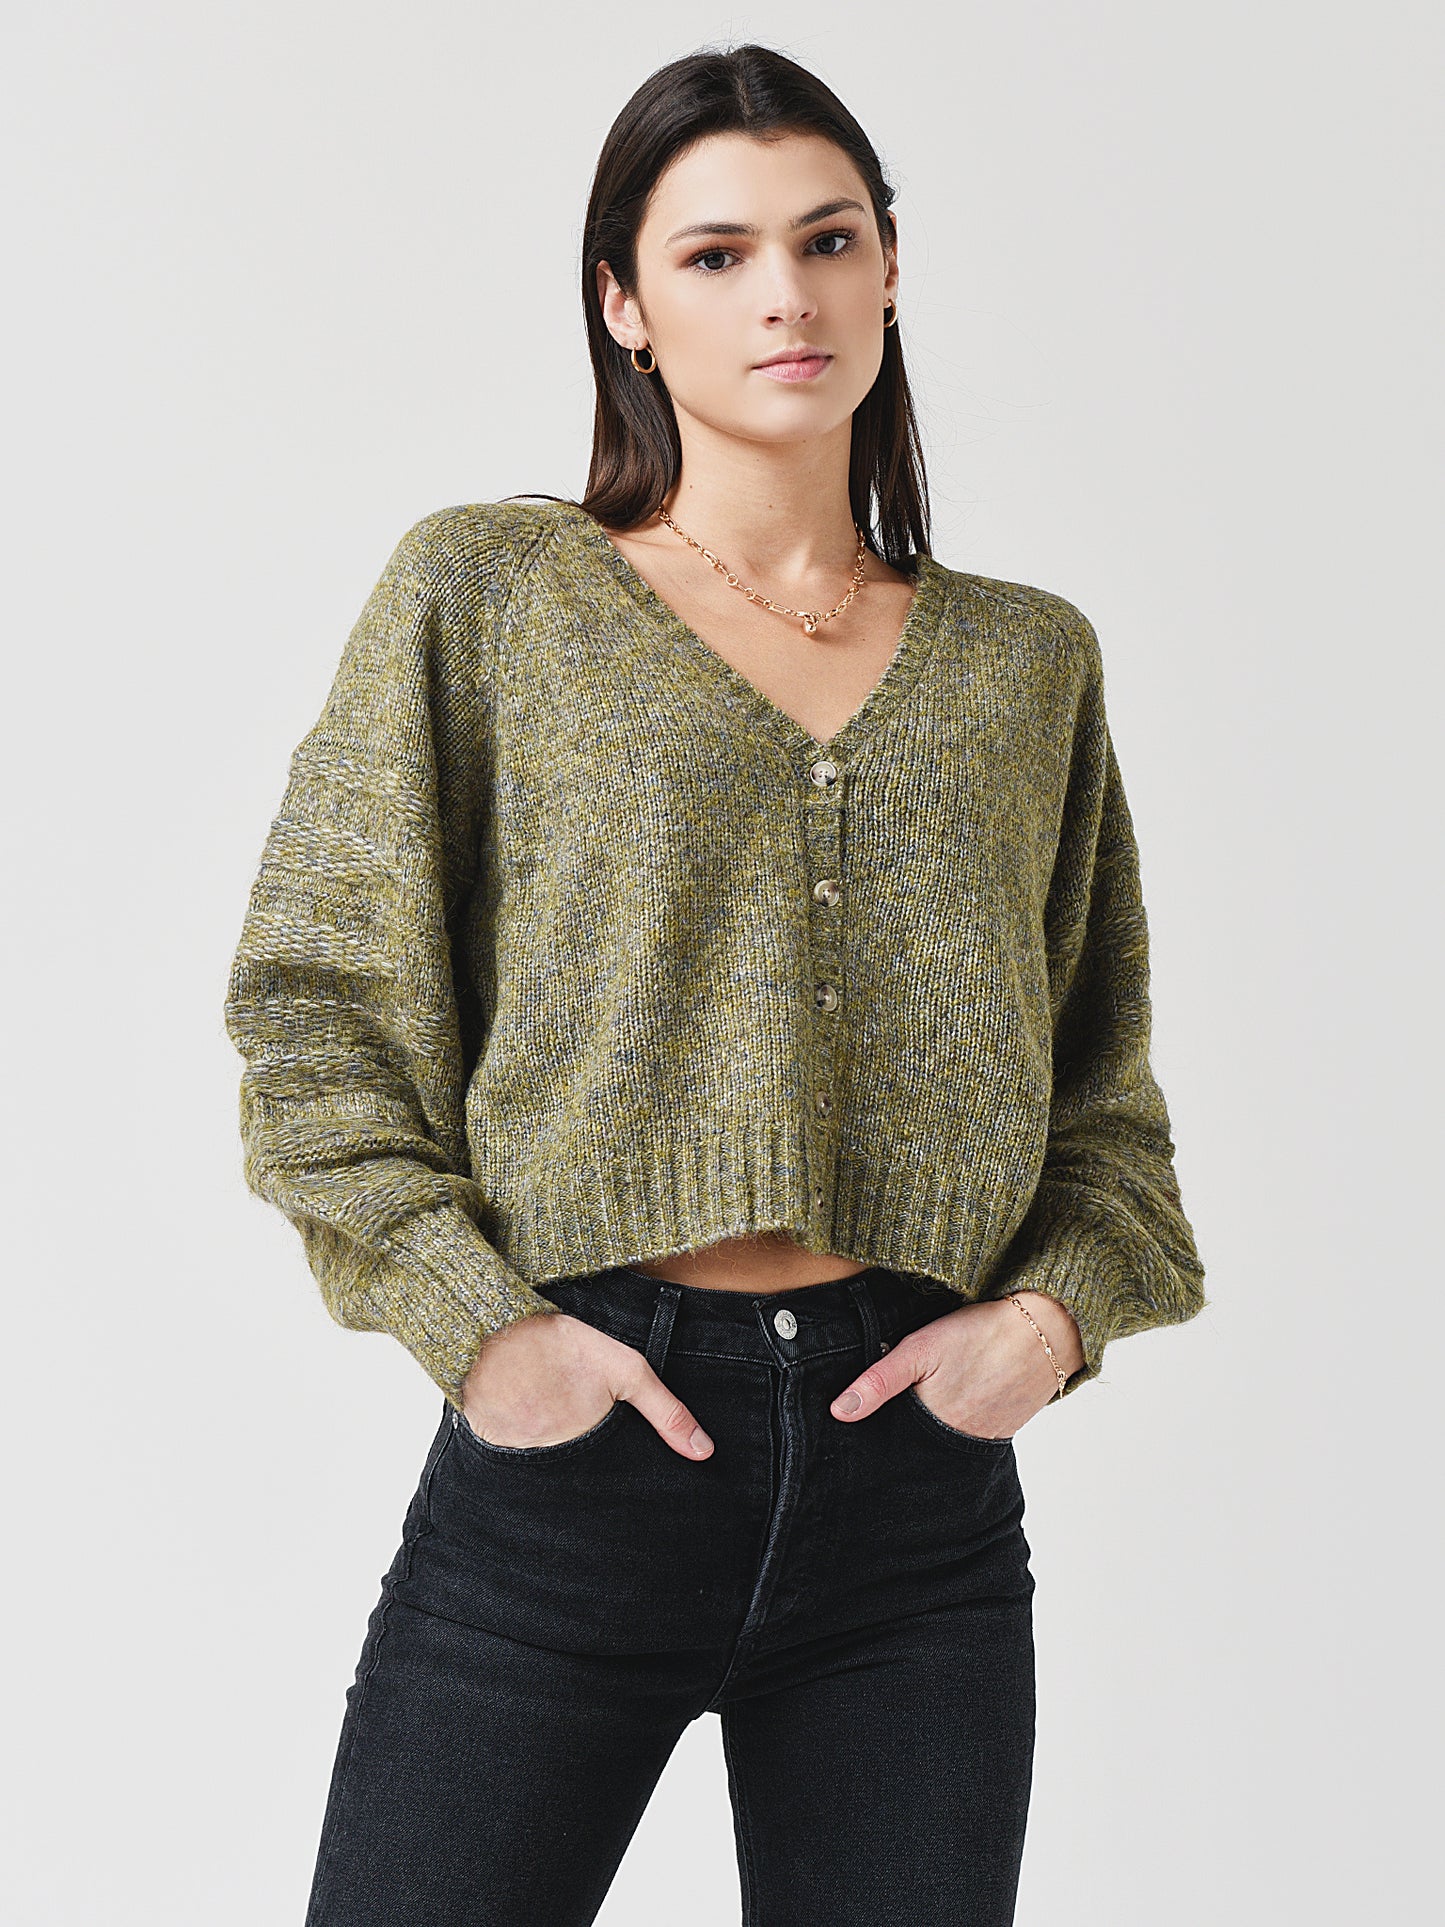 Z Supply Women's Essex Cable Sweater